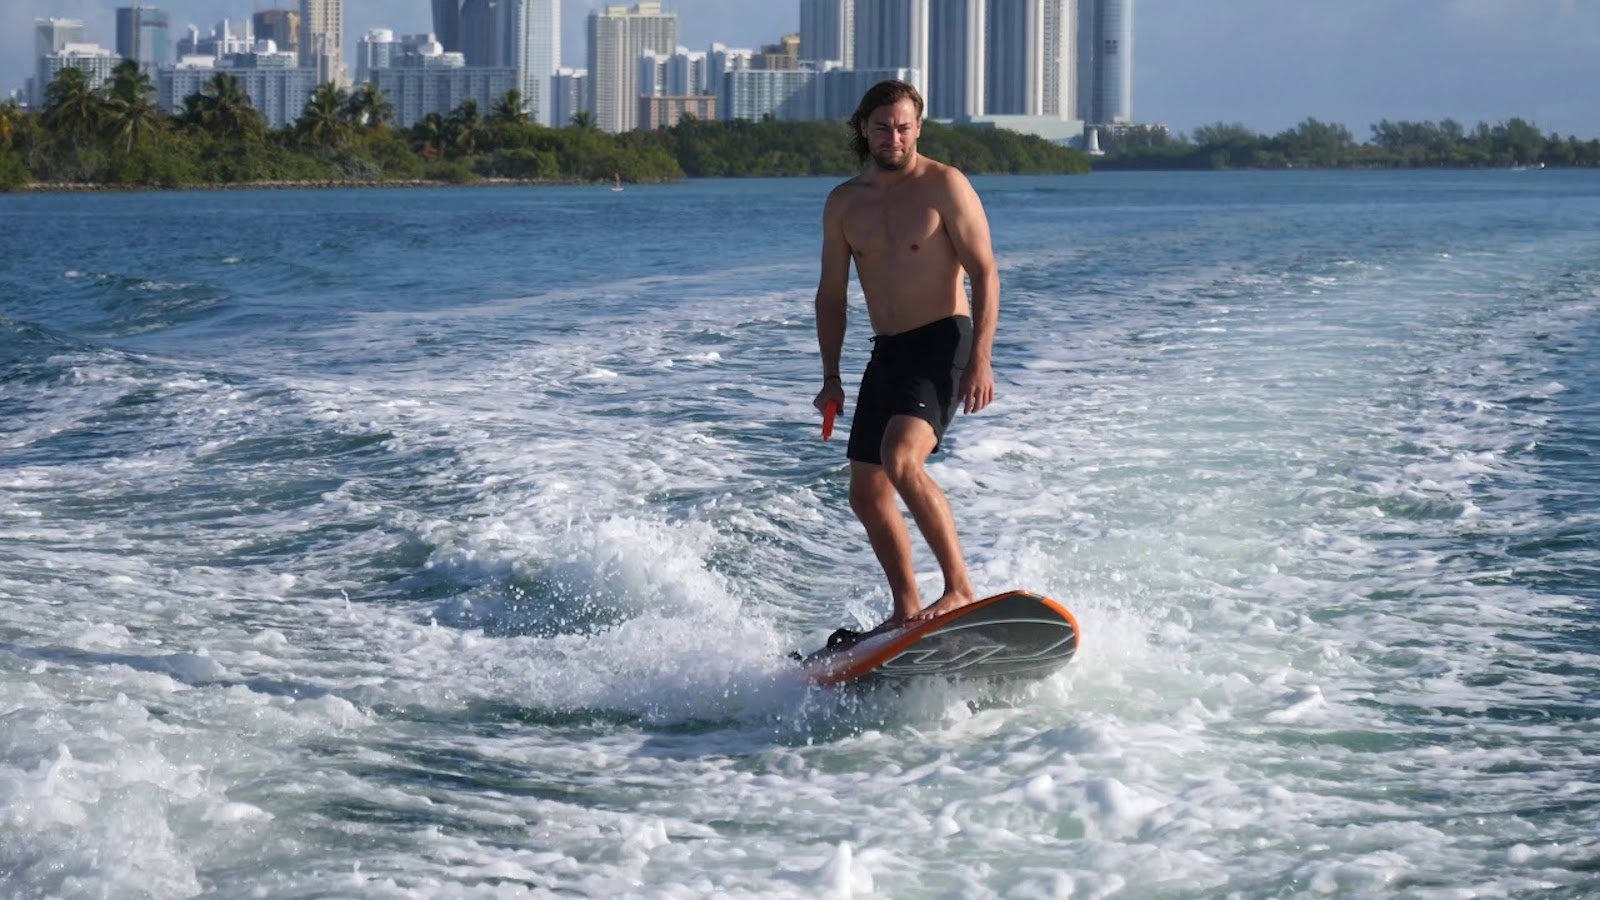 Yujet Surfer Jet-Powered Surfboard uses an engine to travel up to 16 miles